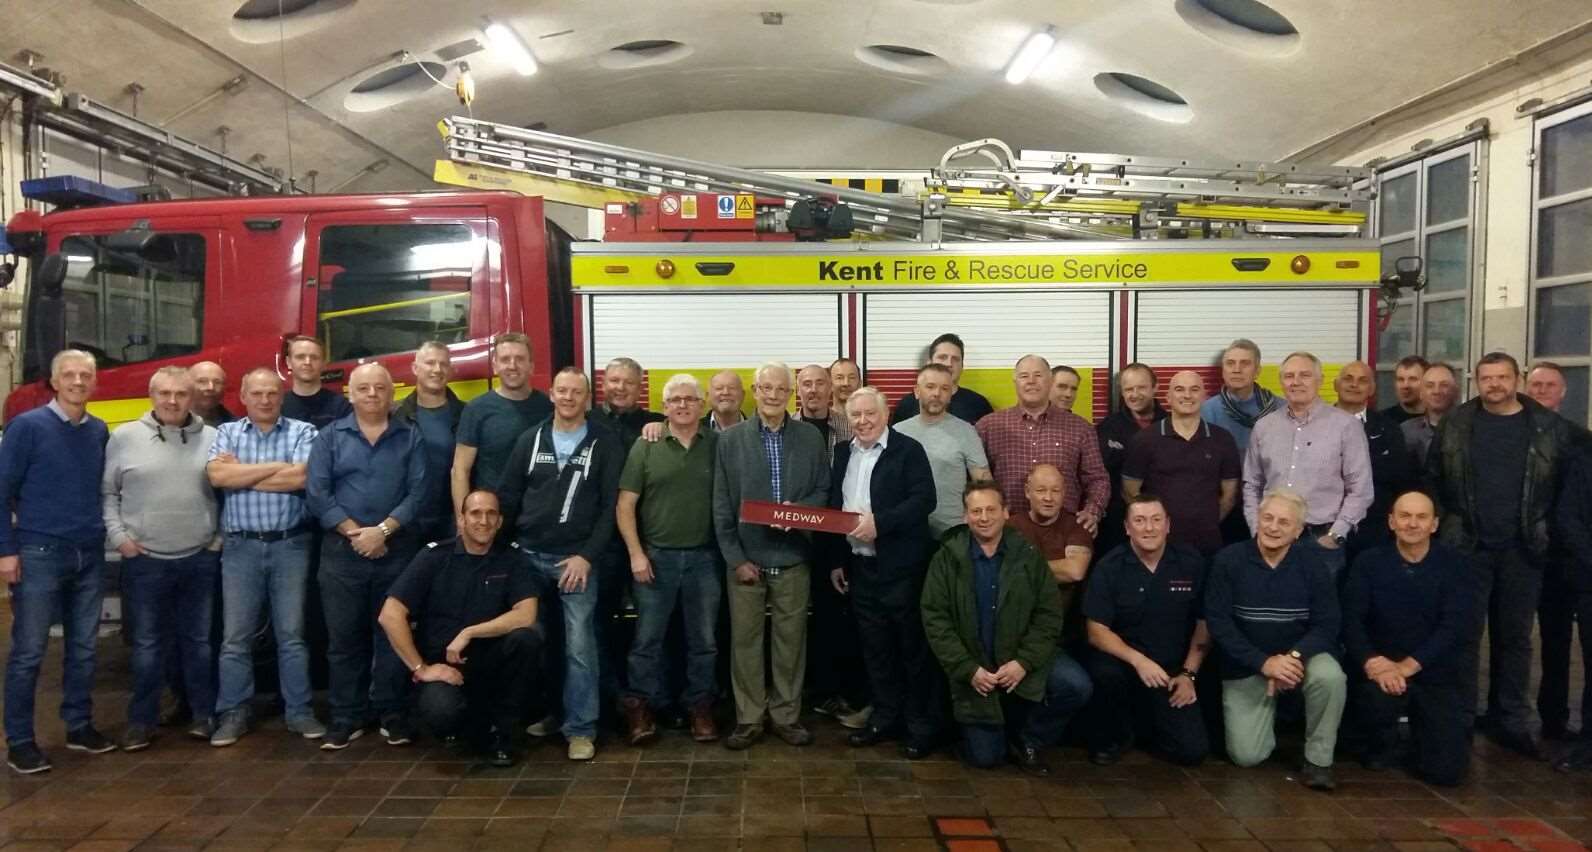 The reunion at Medway Fire Station